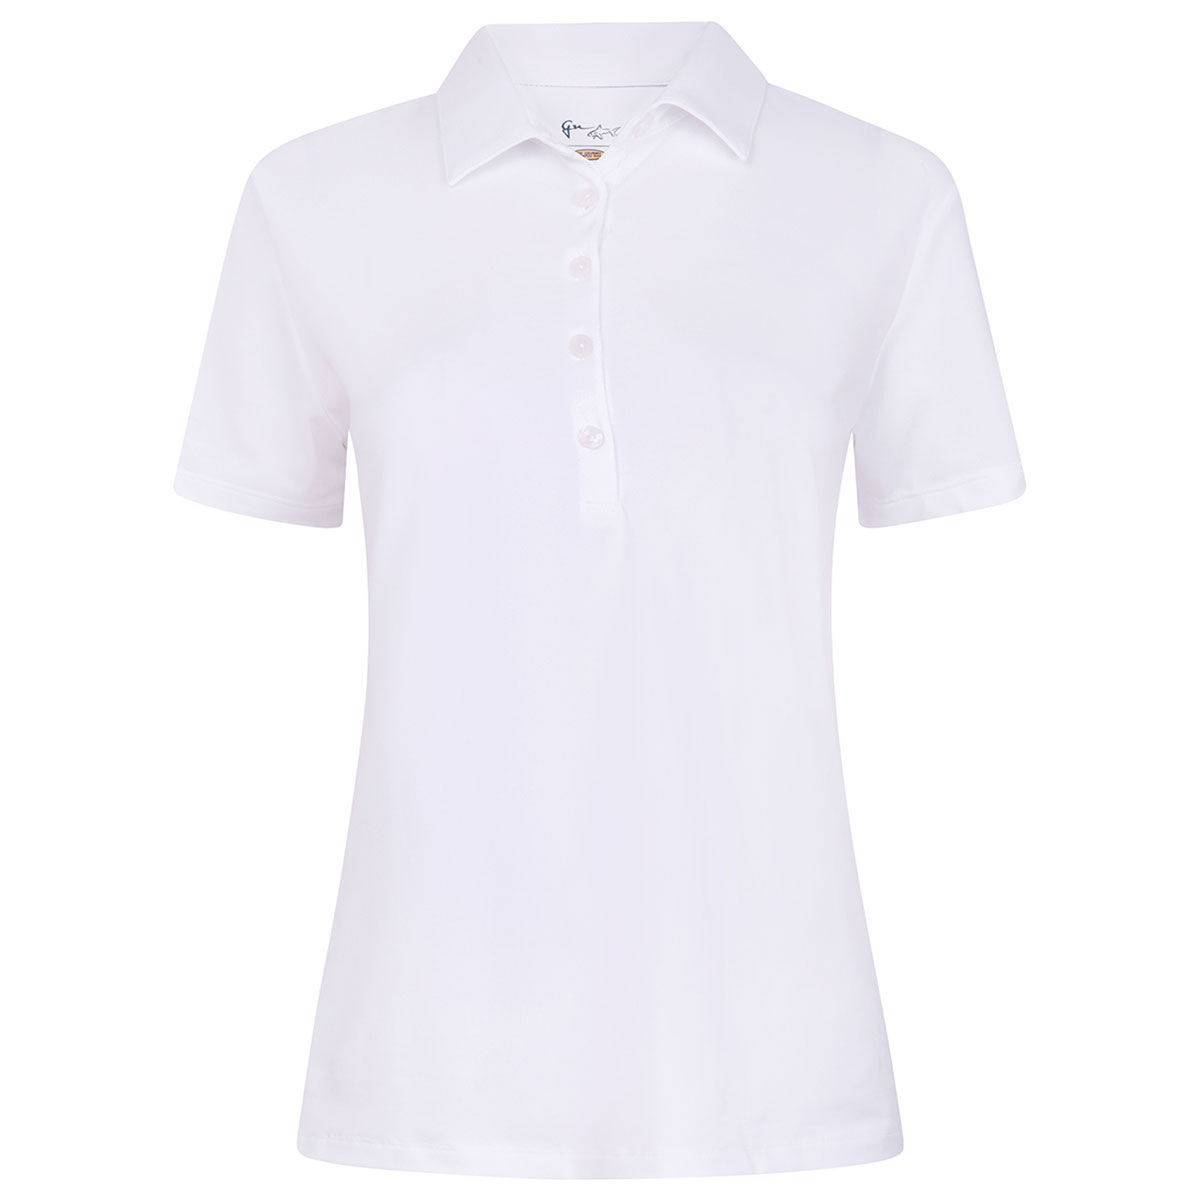 Greg Norman White Embroidered Freedom Pique Golf Polo Shirt, Womens | American Golf, Size: XL von Greg Norman